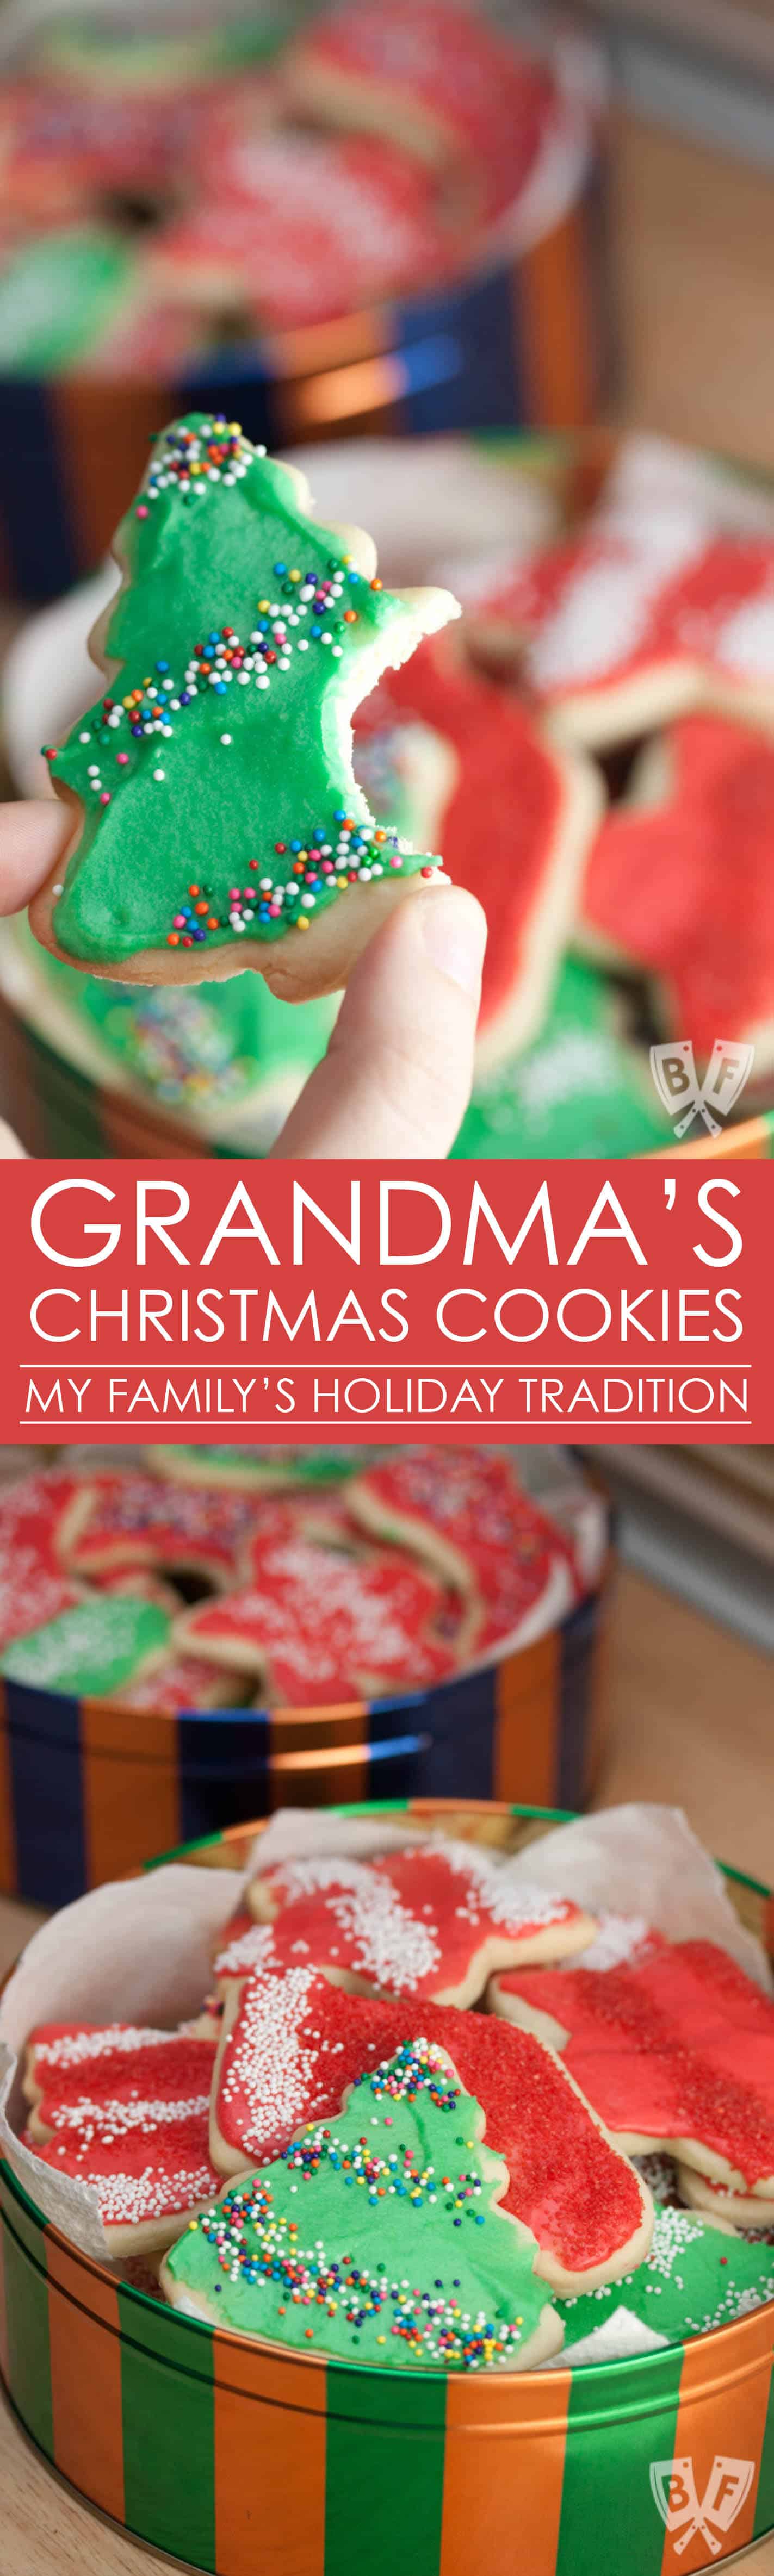 Nothing beats Grandma's recipes! These traditional roll out sugar cookies are a Christmas dessert that keep my grandma's memory alive. Get ready to break out the cookie cutters and decorative sprinkles for these festive treats!